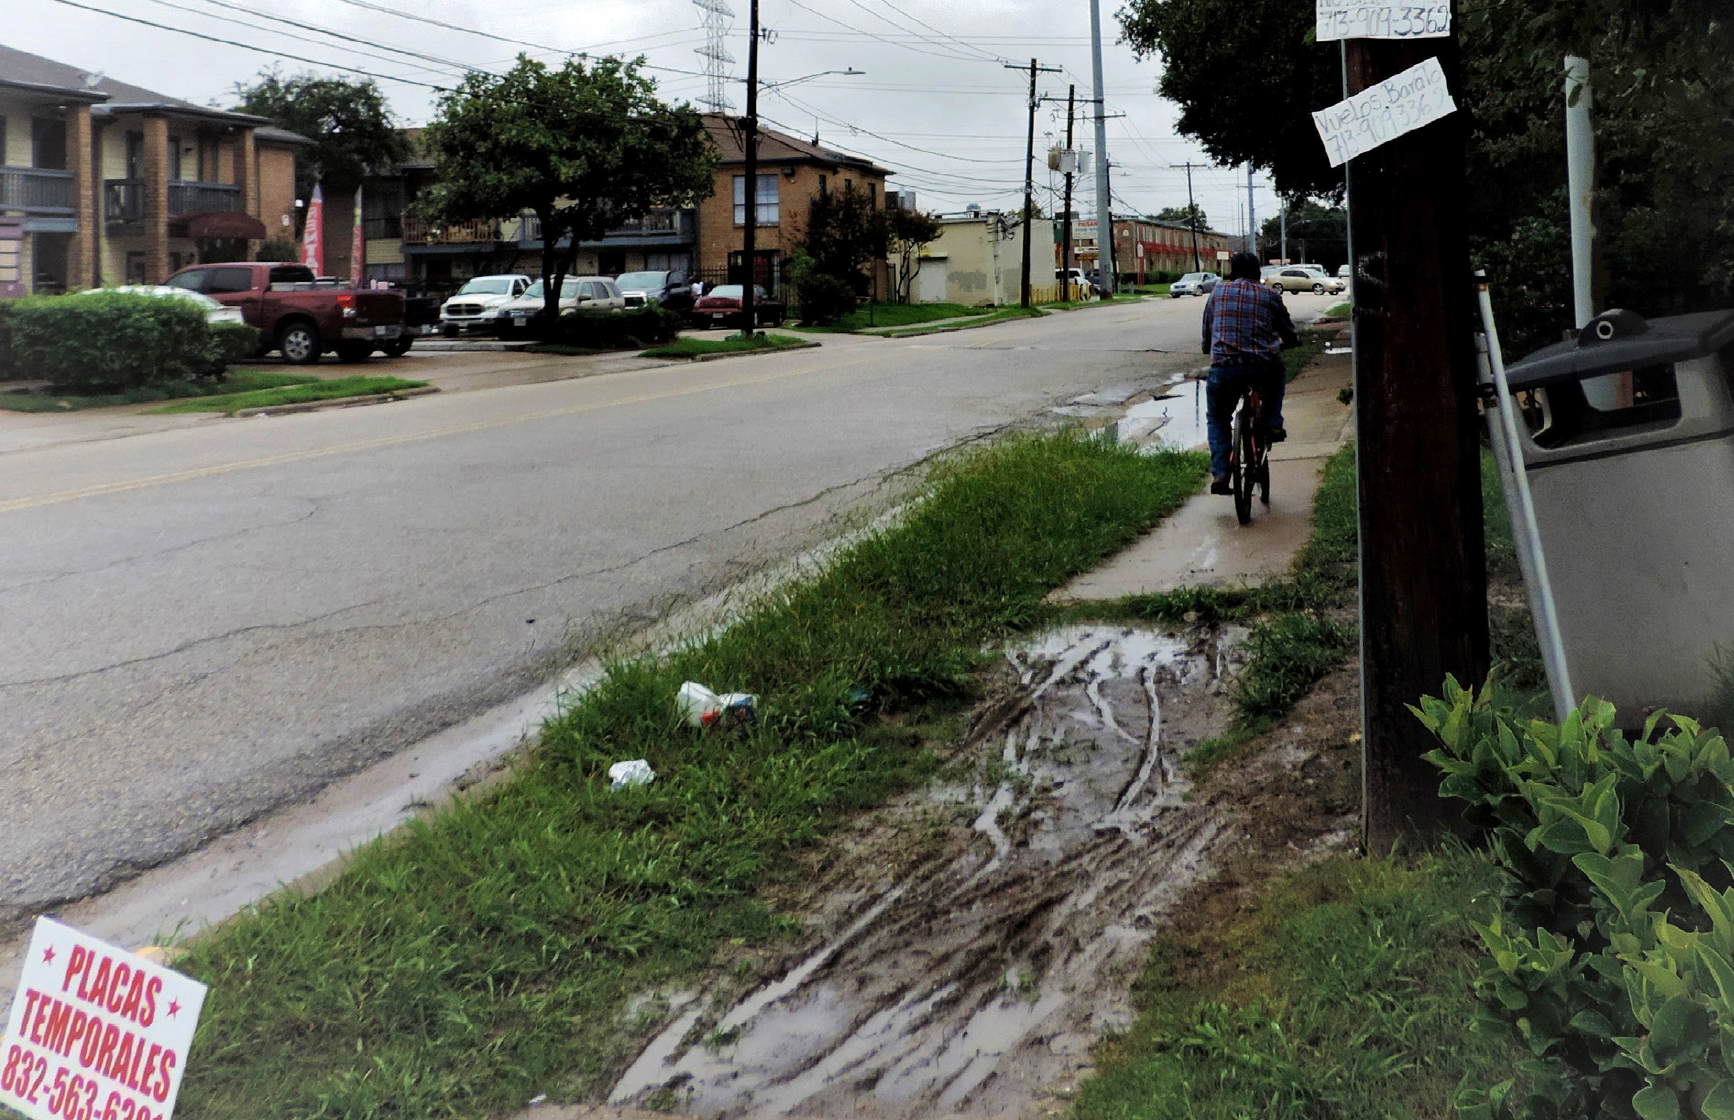 A muddy patch of grass interrupts the sidewalk in Gulfton as a bicyclist navigates onward